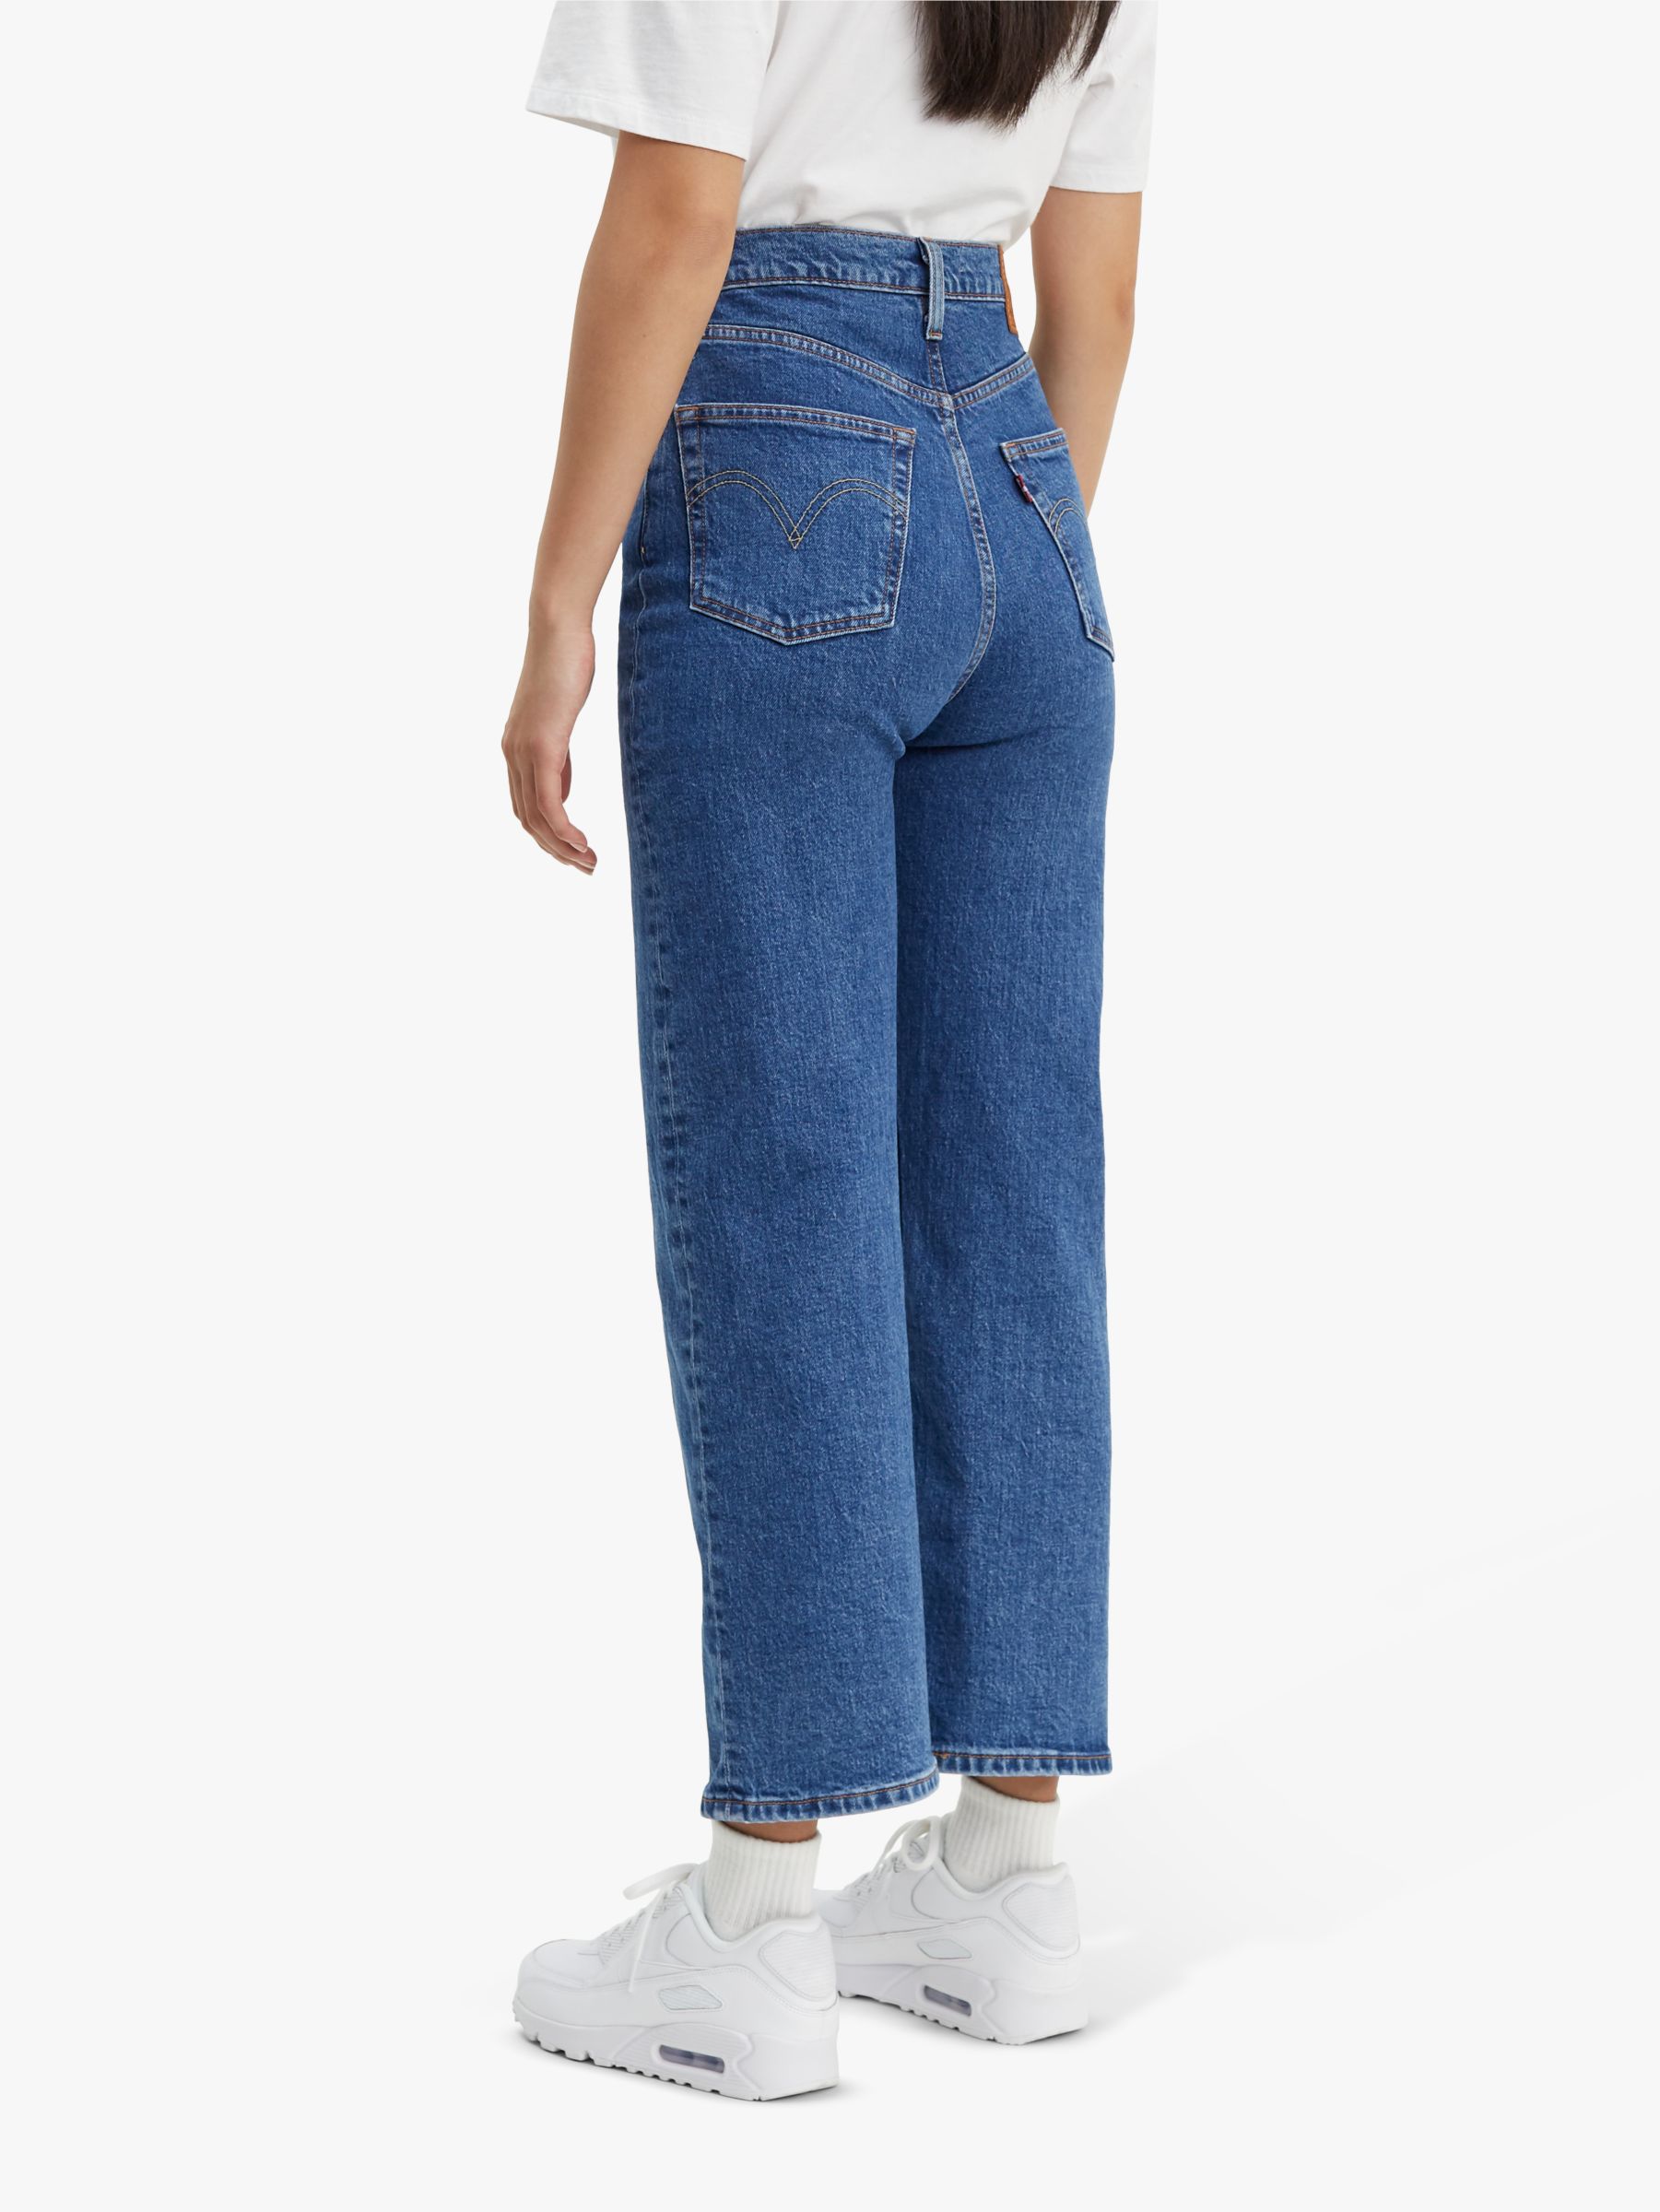 Levi's Ribcage Straight Ankle Jeans, Georgie at John Lewis & Partners